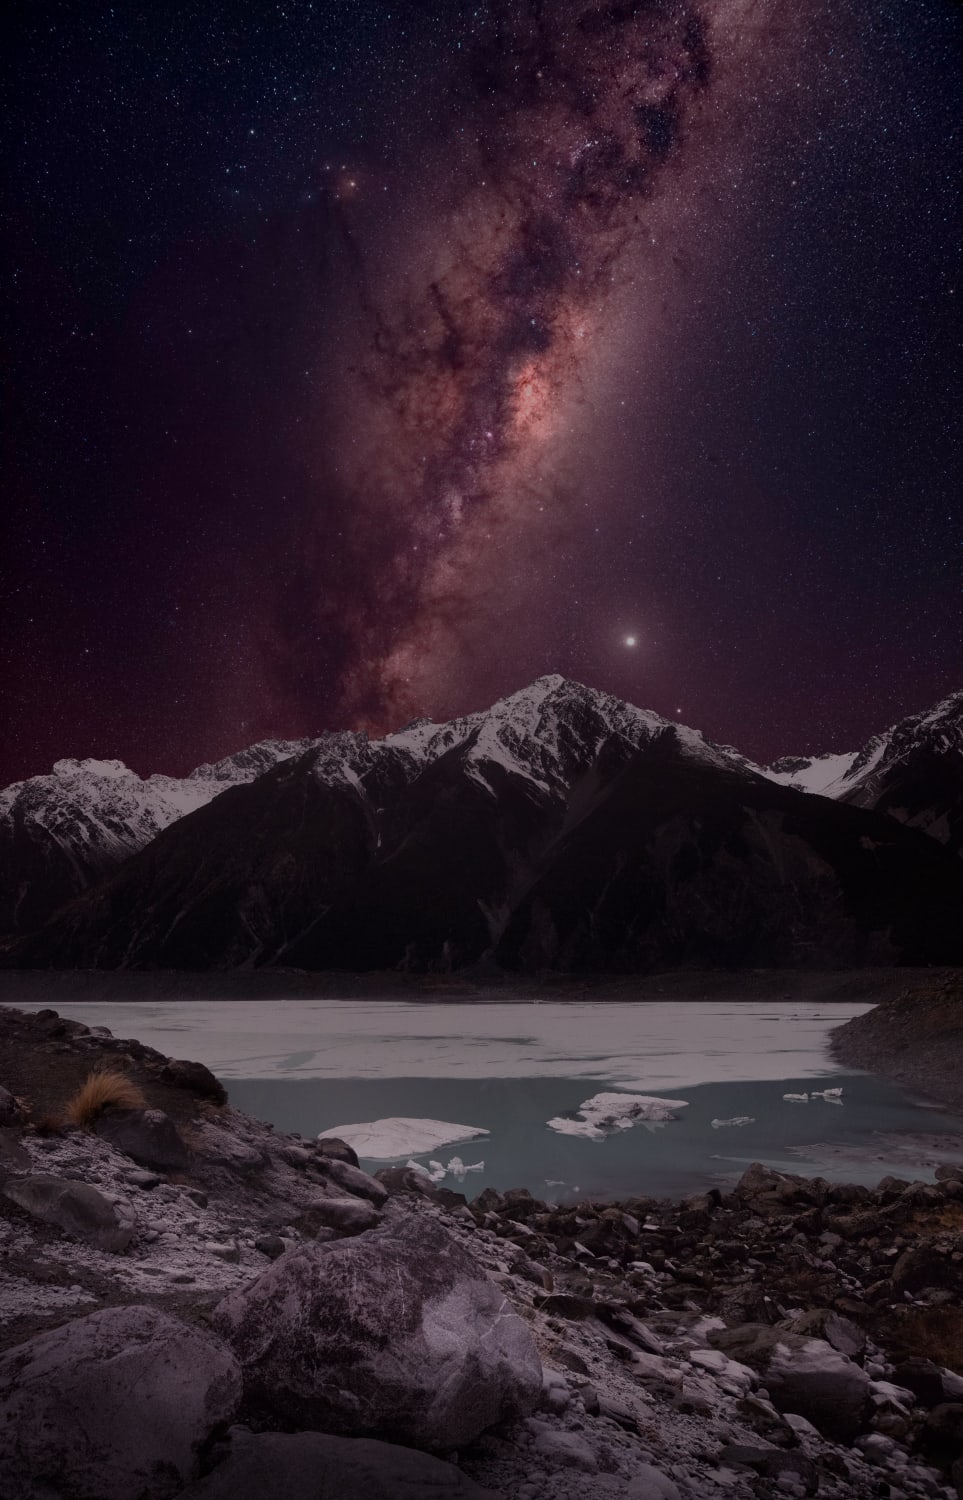 Some Milky Way action from Tasman Lake, NZ